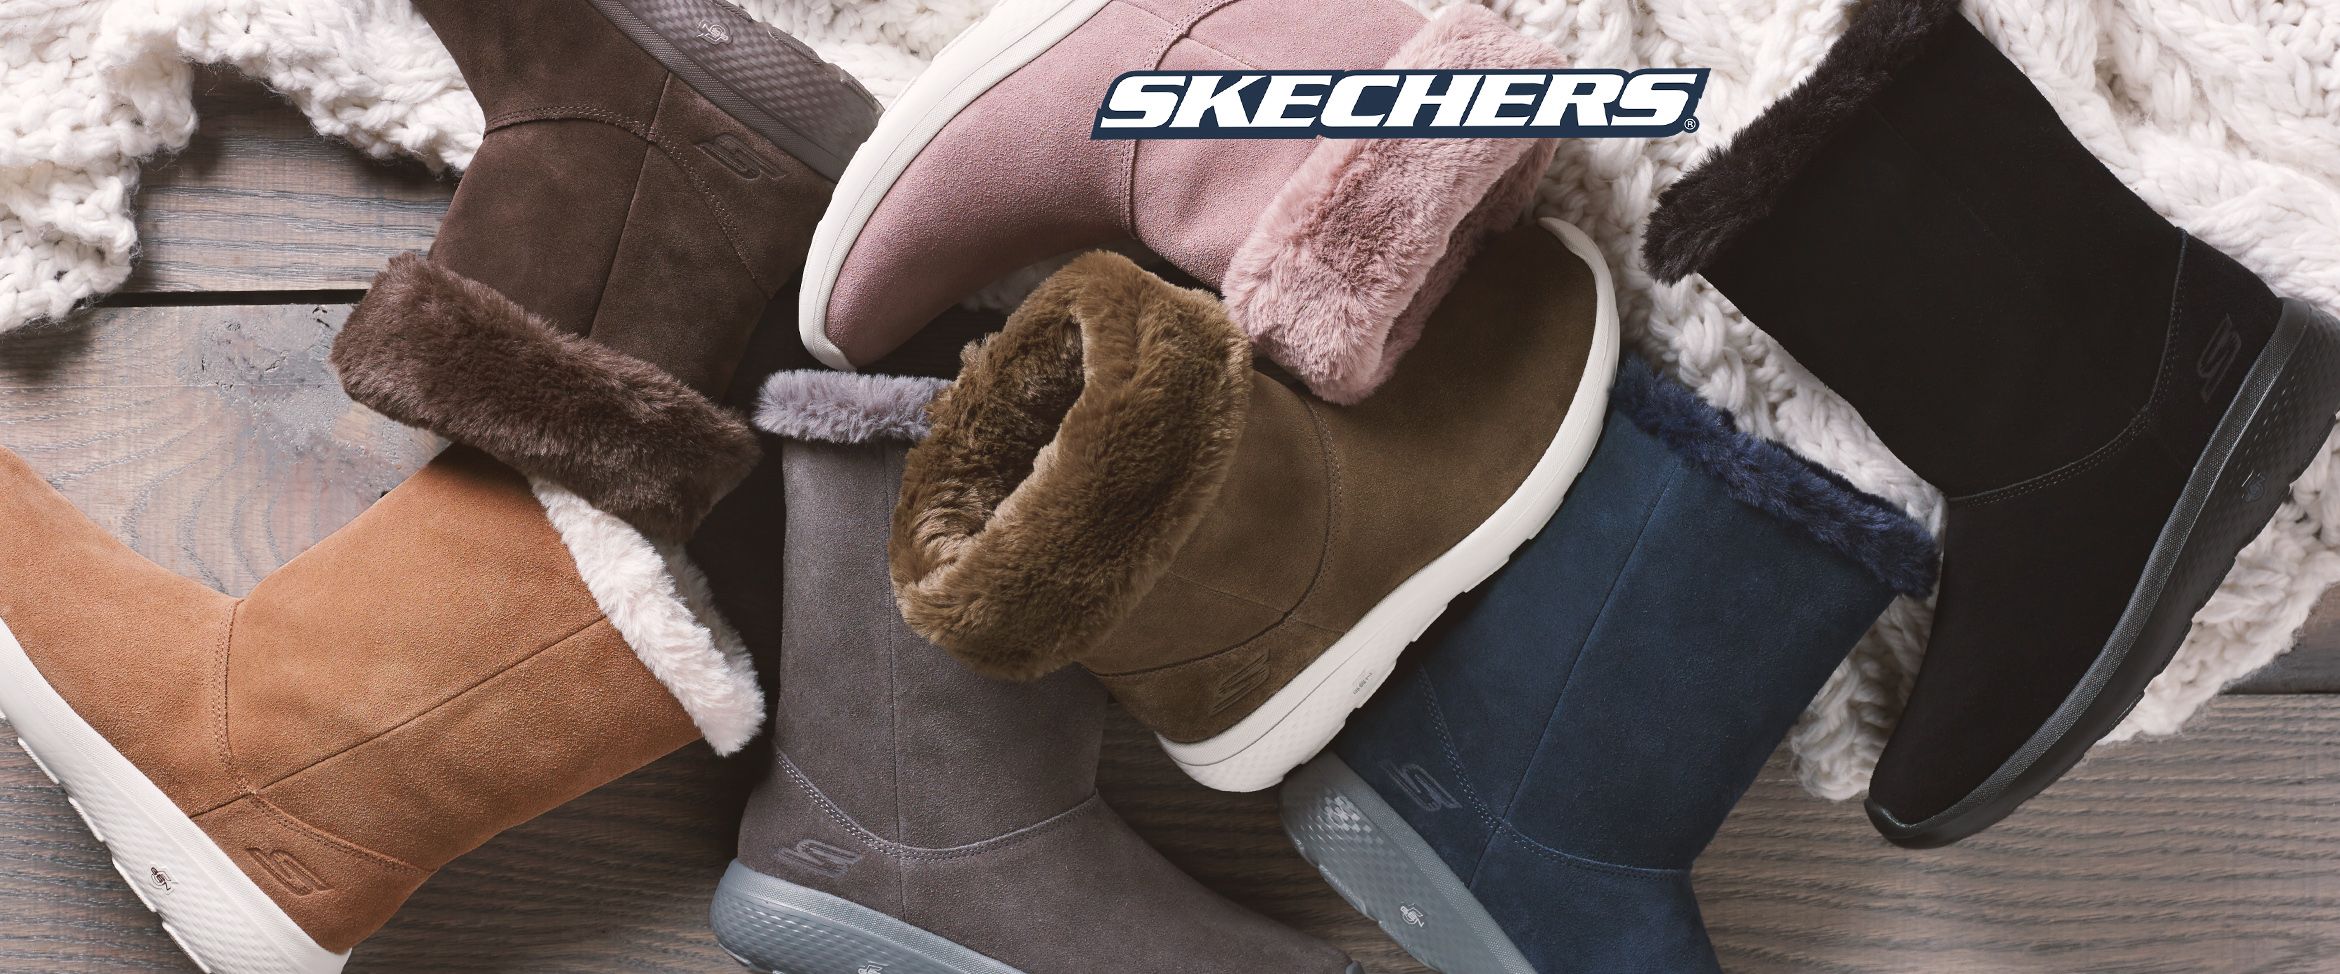 skechers gowalk suede and faux fur boots